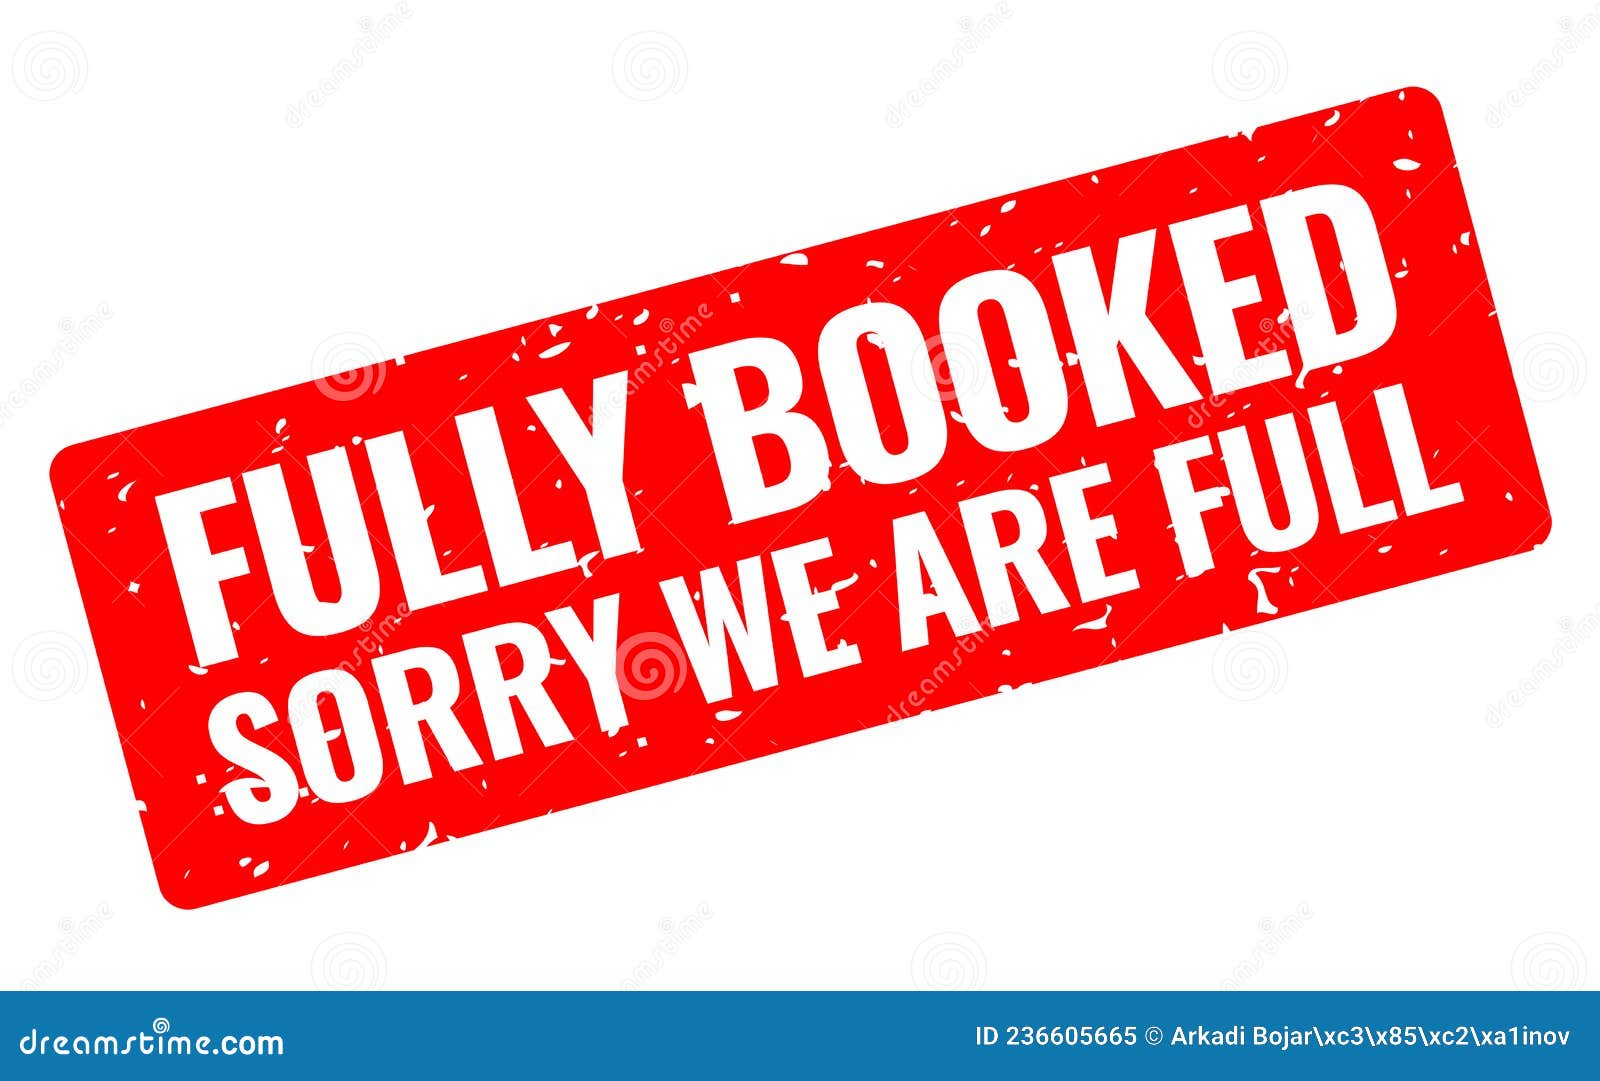 fully booked grunge banner, sorry we are full